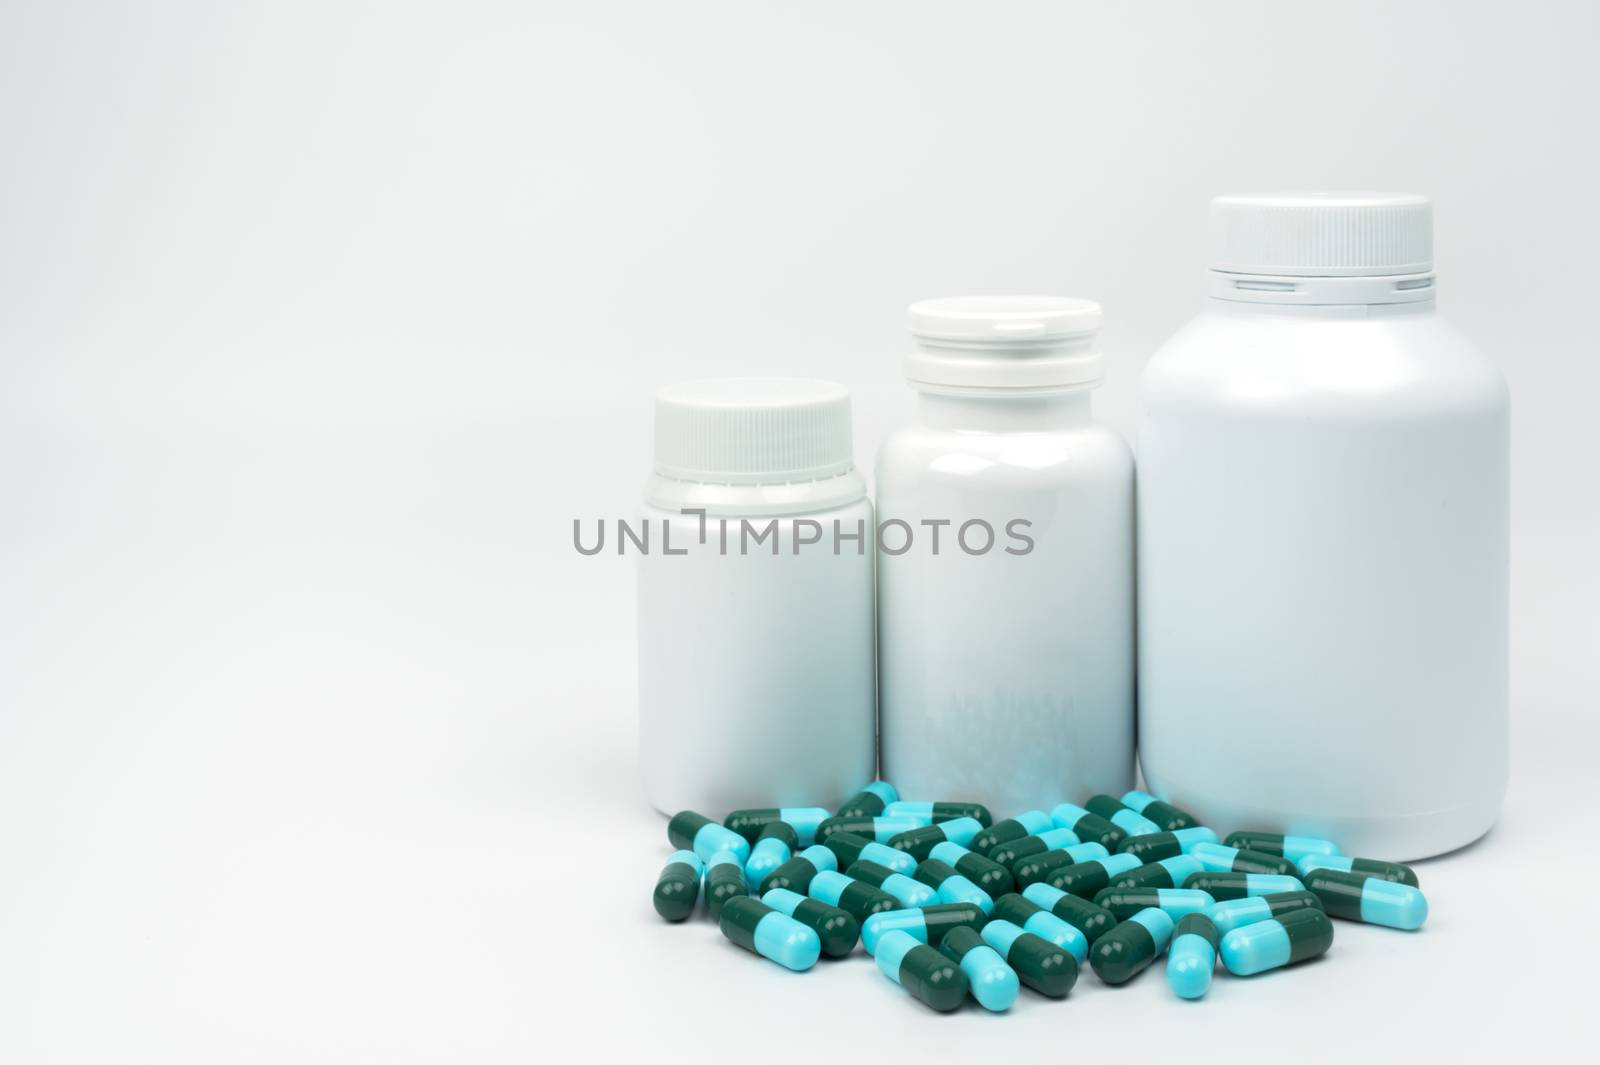 Antibiotic capsule pills and plastic bottle with blank label isolated on white background with copy space. Drug resistance concept. Antibiotics drug use with reasonable and global healthcare concept. Pharmaceutical industry. Pharmacy background. Health budgets and policy concept.